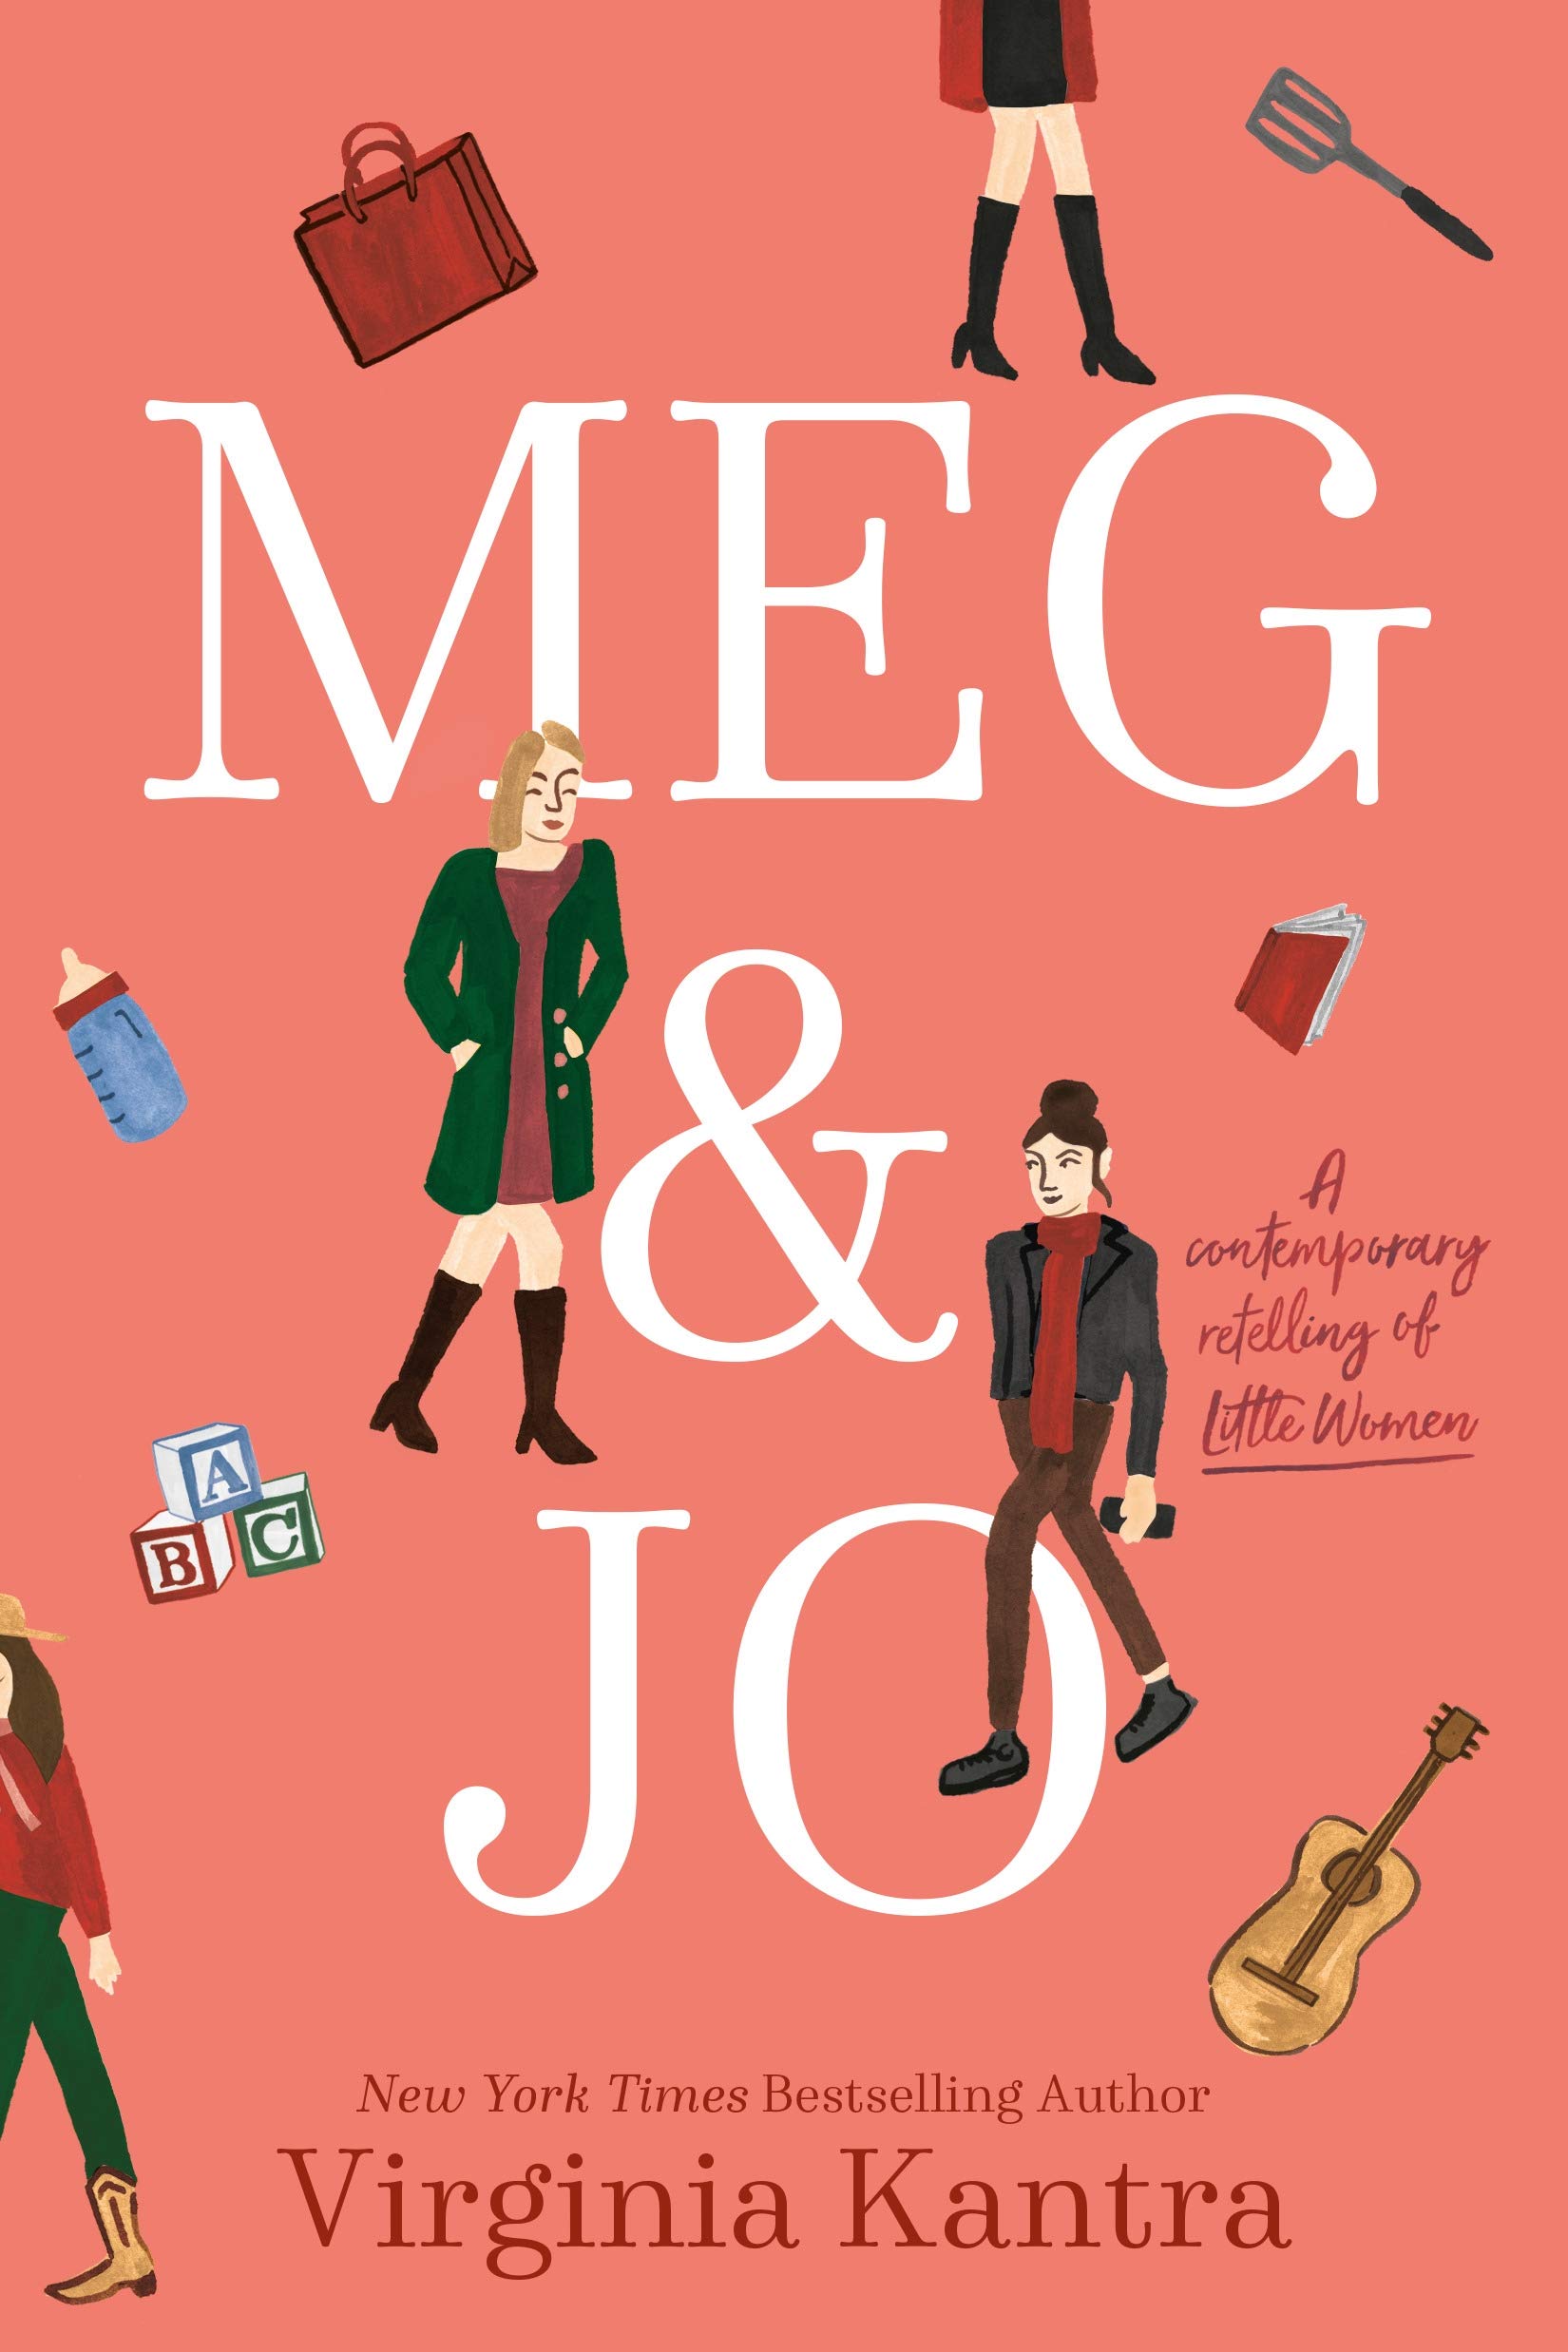 Image for "Meg and Jo"